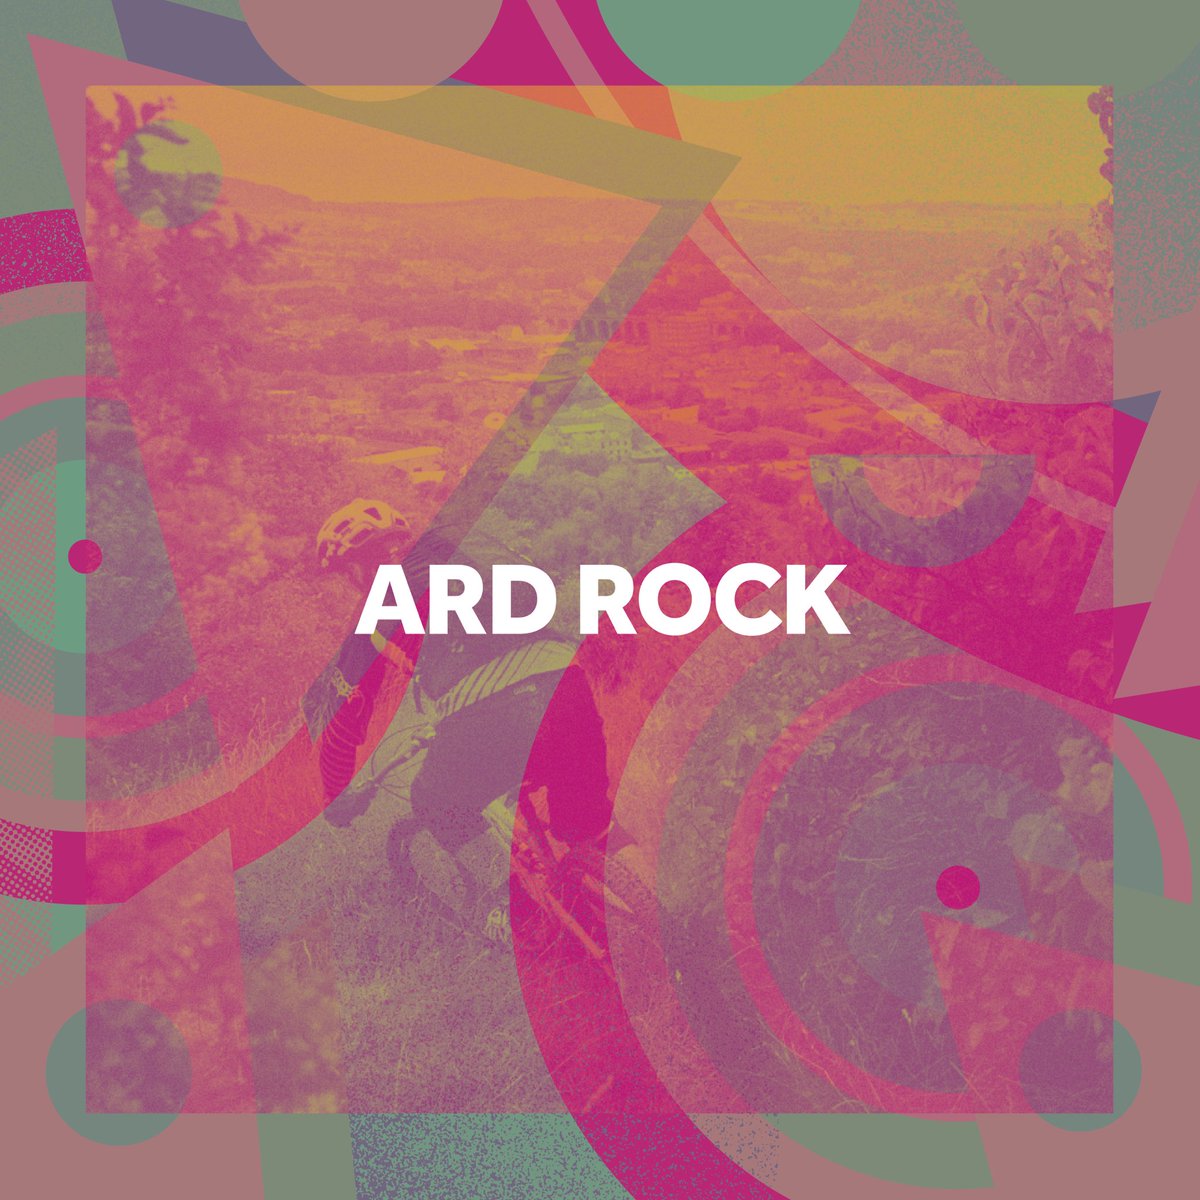 A busy weekend for us lot! Super stoked to announce that we’ll be pitching up and pouring @ardrockenduro 🍻. Look out for the Landy and grab some post ride/ expo refreshment from our team on the Moors. Trail Crew - Let's go 🤘.